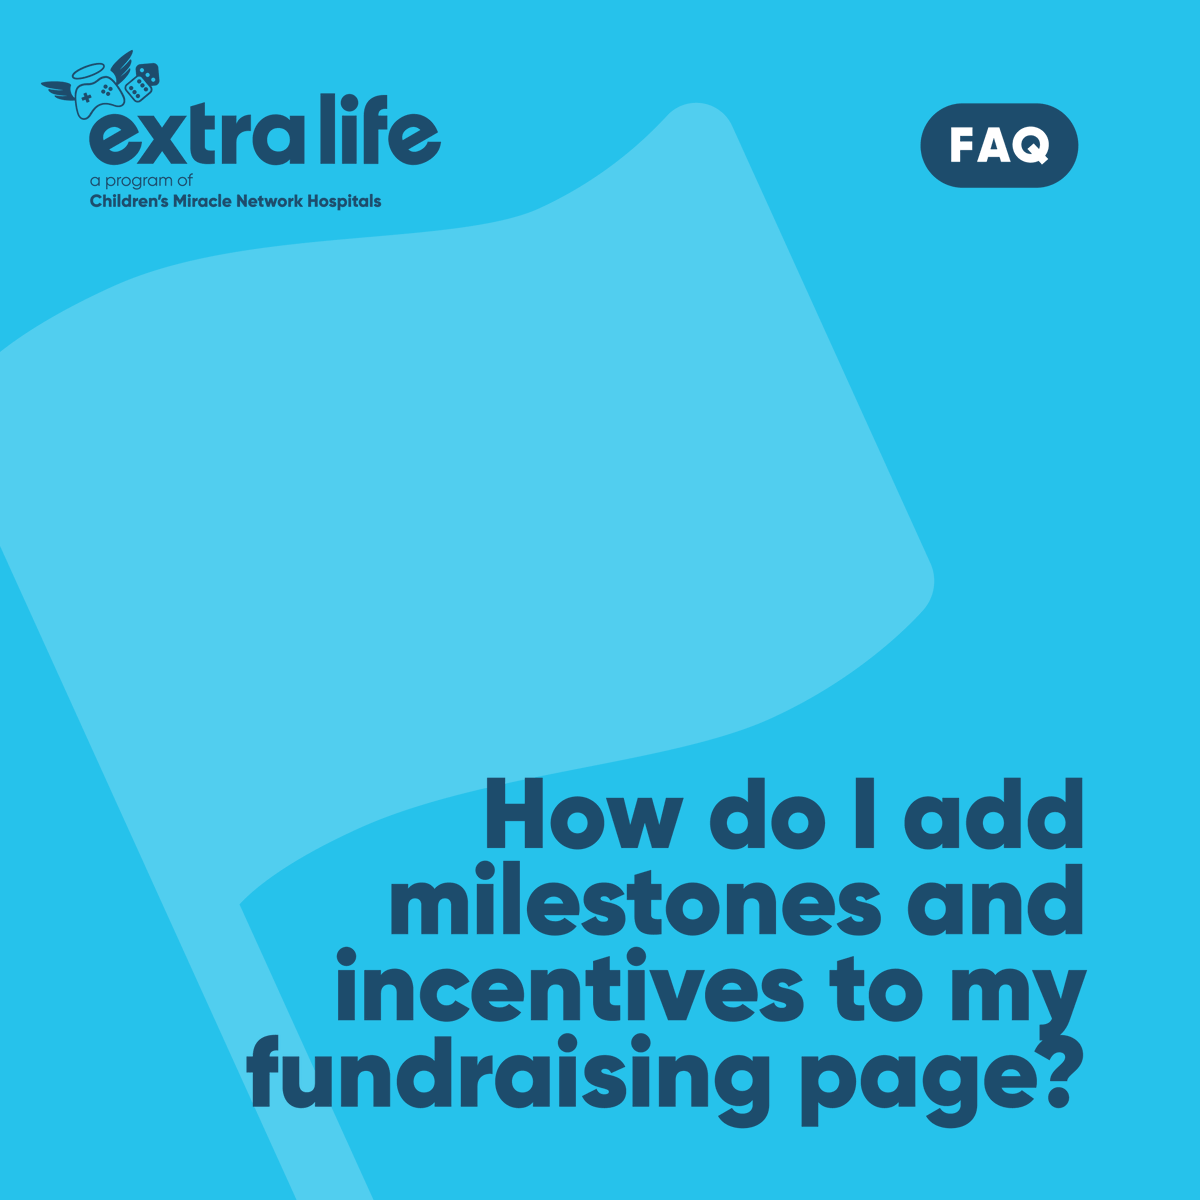 Simply log in to your #ExtraLife account, go to your participant page, & select the pencil icon next to your fundraising goal! You'll be given options to add milestones or incentives from there. Sign up for Extra Life to play #games to change kids' health: cmnh.co/0p3